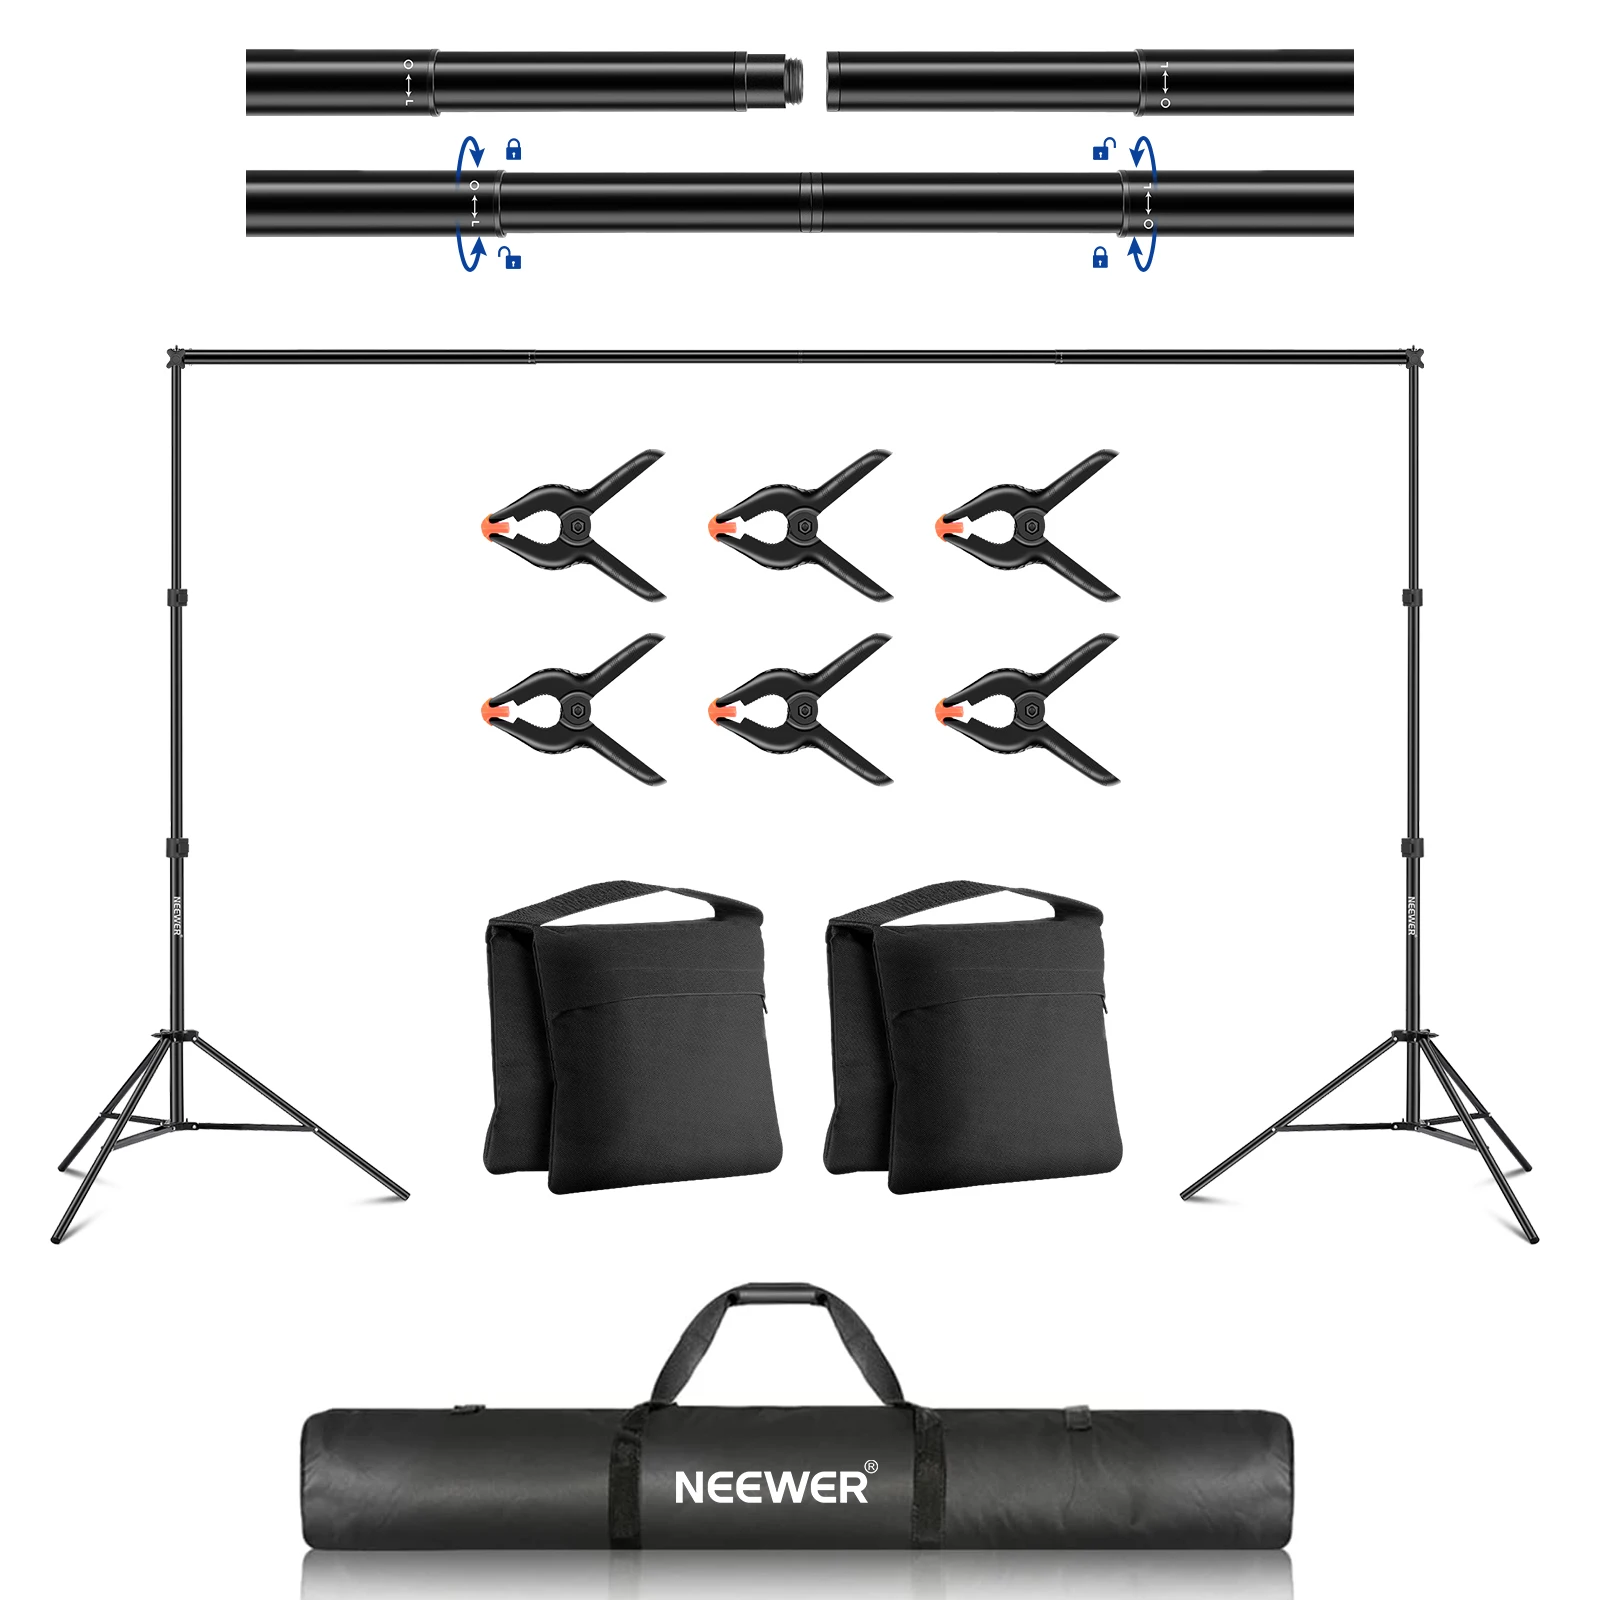 

NEEWER Photo Studio Backdrop Support System, 10x7ft Adjustable Background Stand with 2 Telescopic Crossbars, 6 Backdrop Clamps